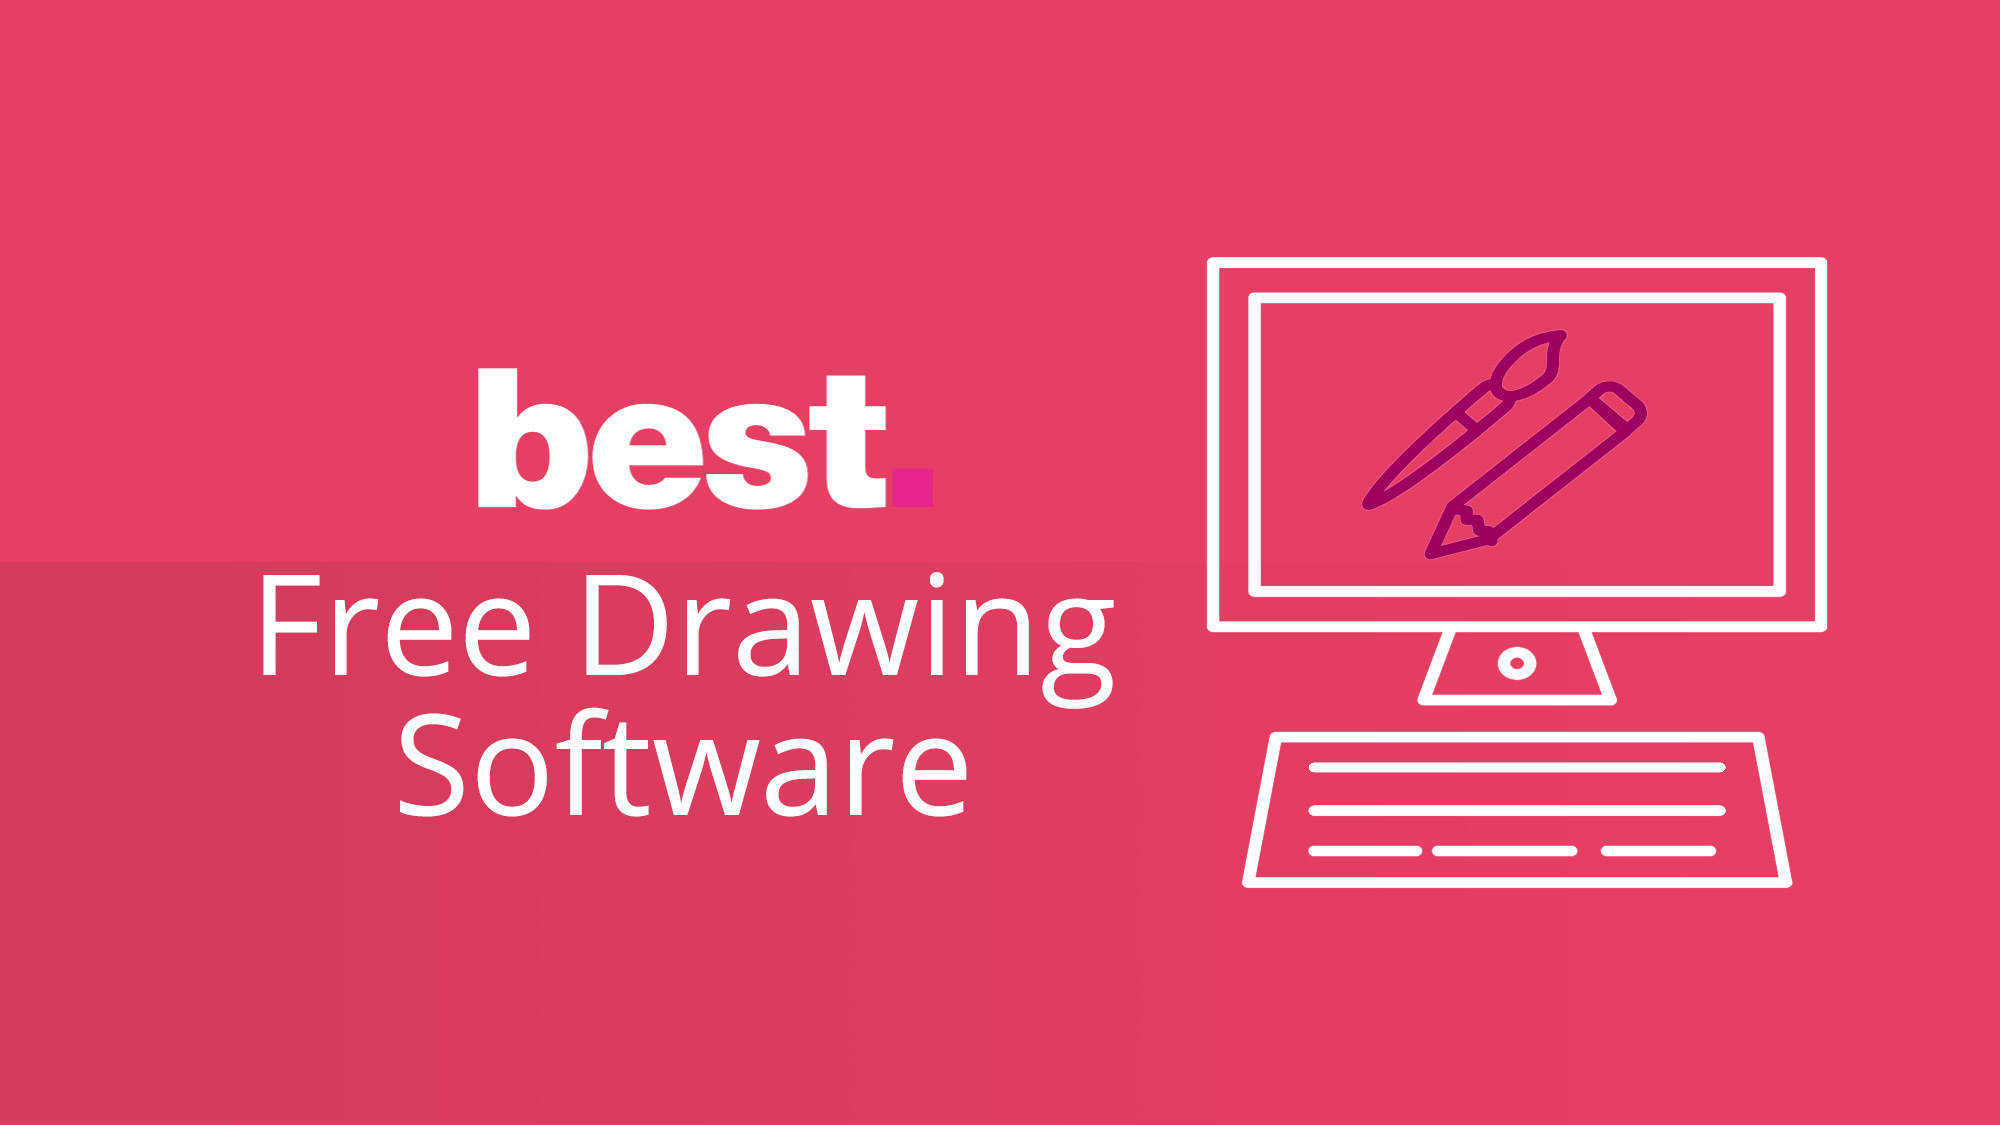 best drawing software for kids windows 10